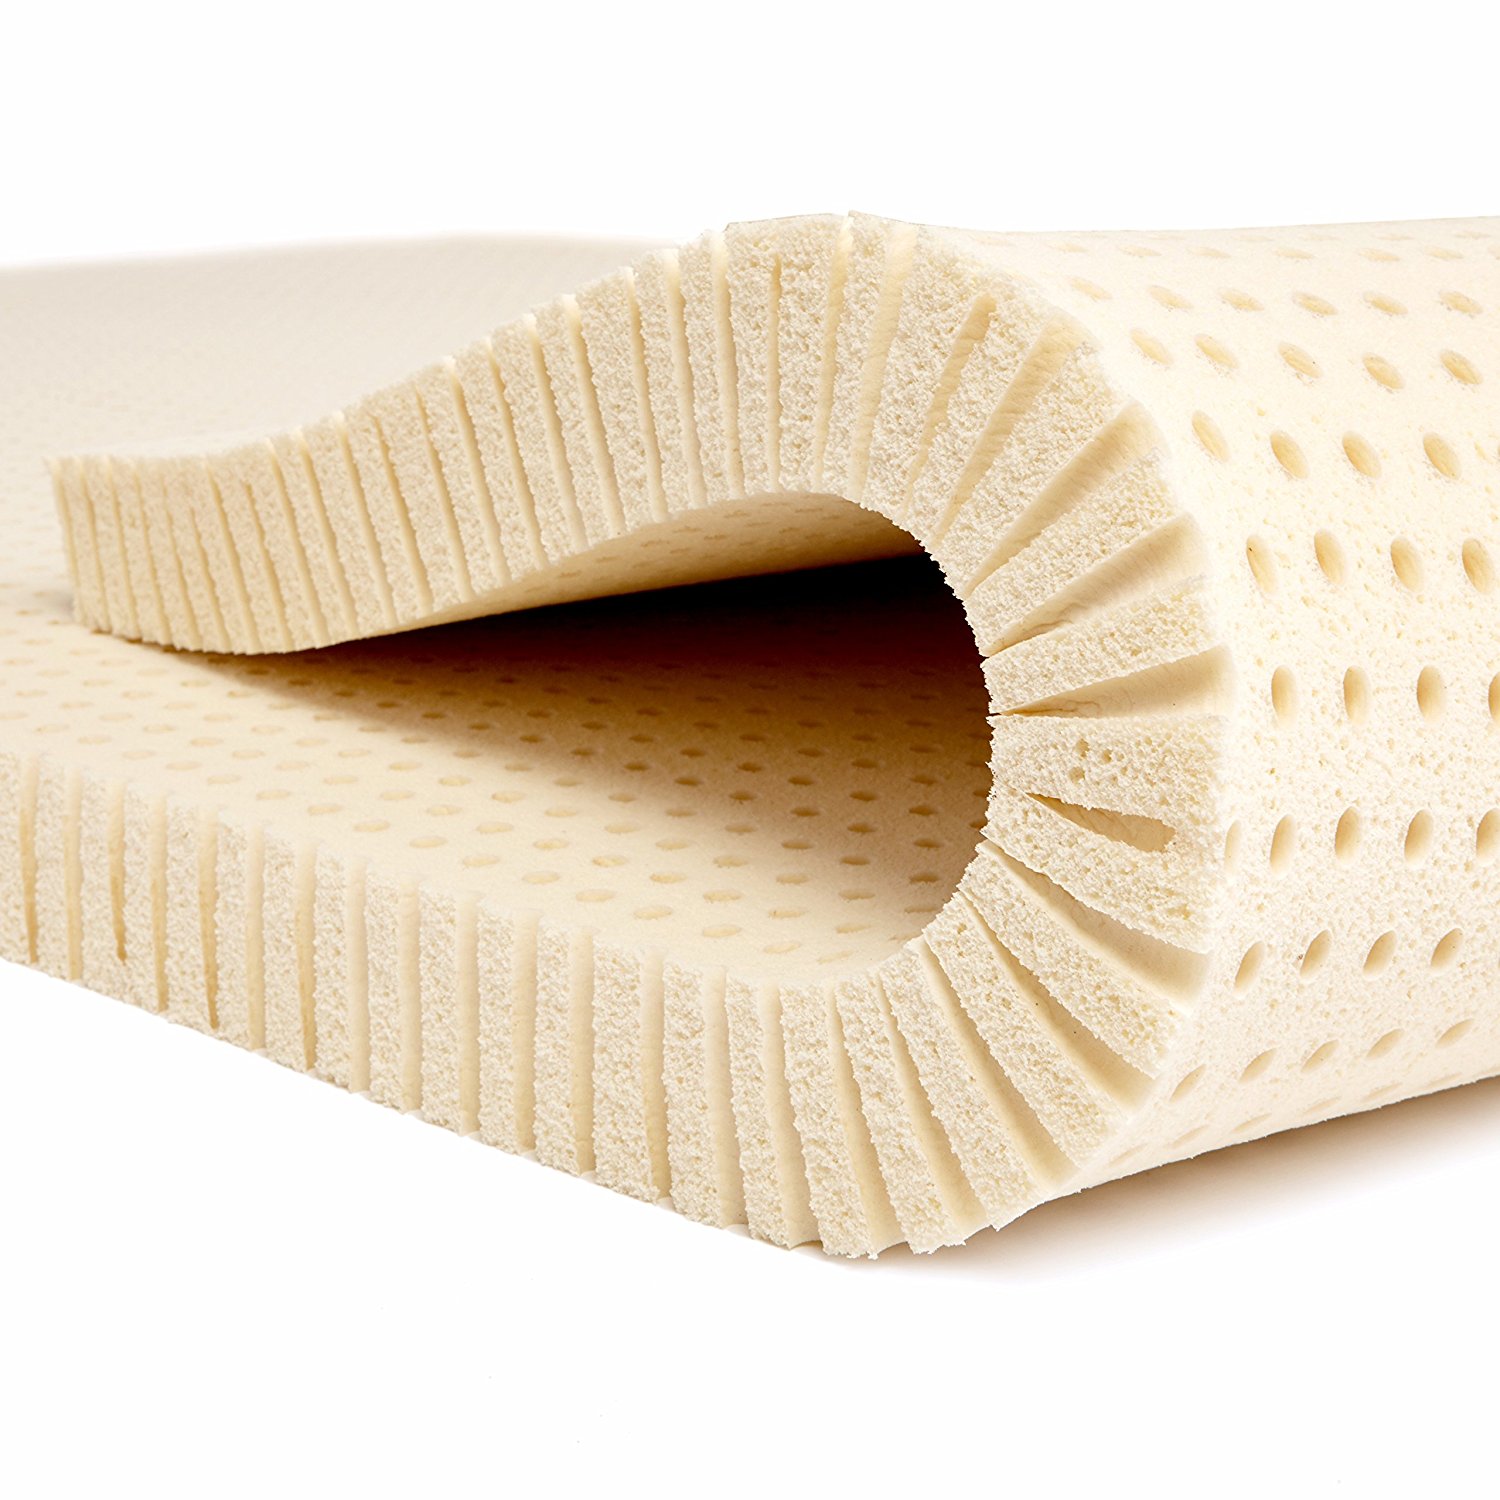 Dunlop latex vs memory foam. Dunlop latex is natural and more responsive. Memory foam is synthetic and may emit VOCs when new. Memory foam is slow to react. The sinking sensation may be distracting for some sleepers. 